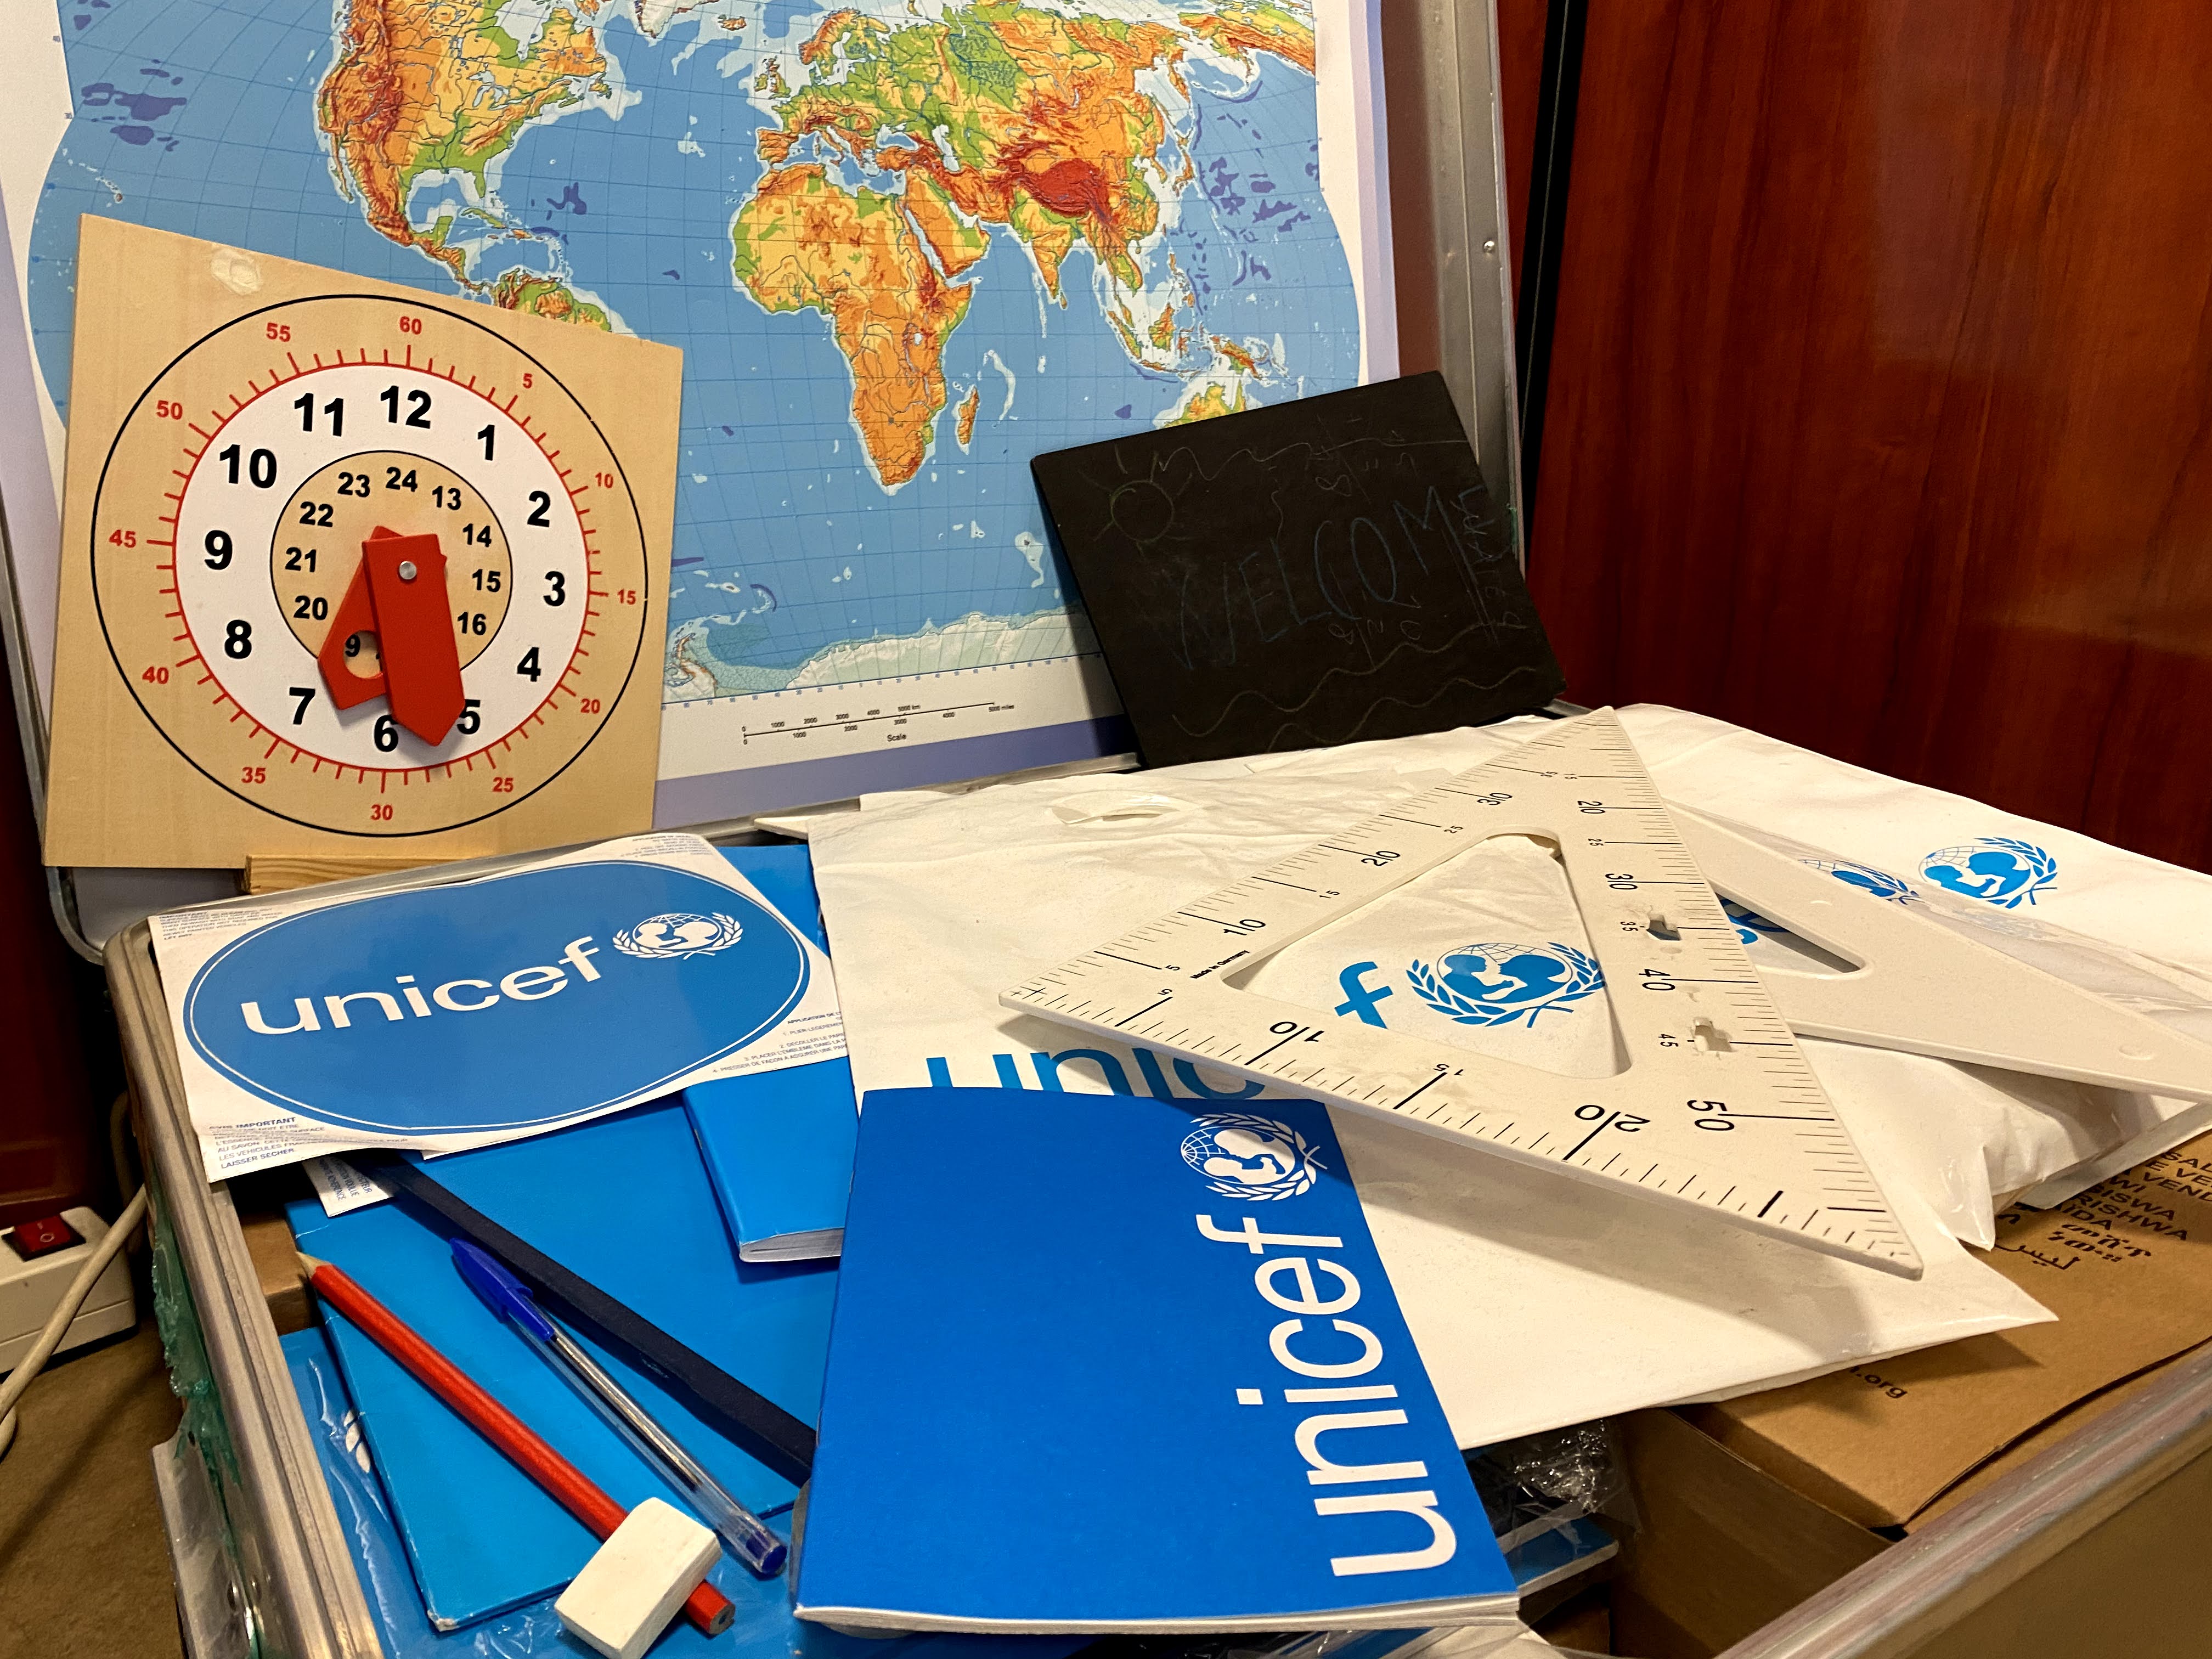 Unicef Inspired Gifts